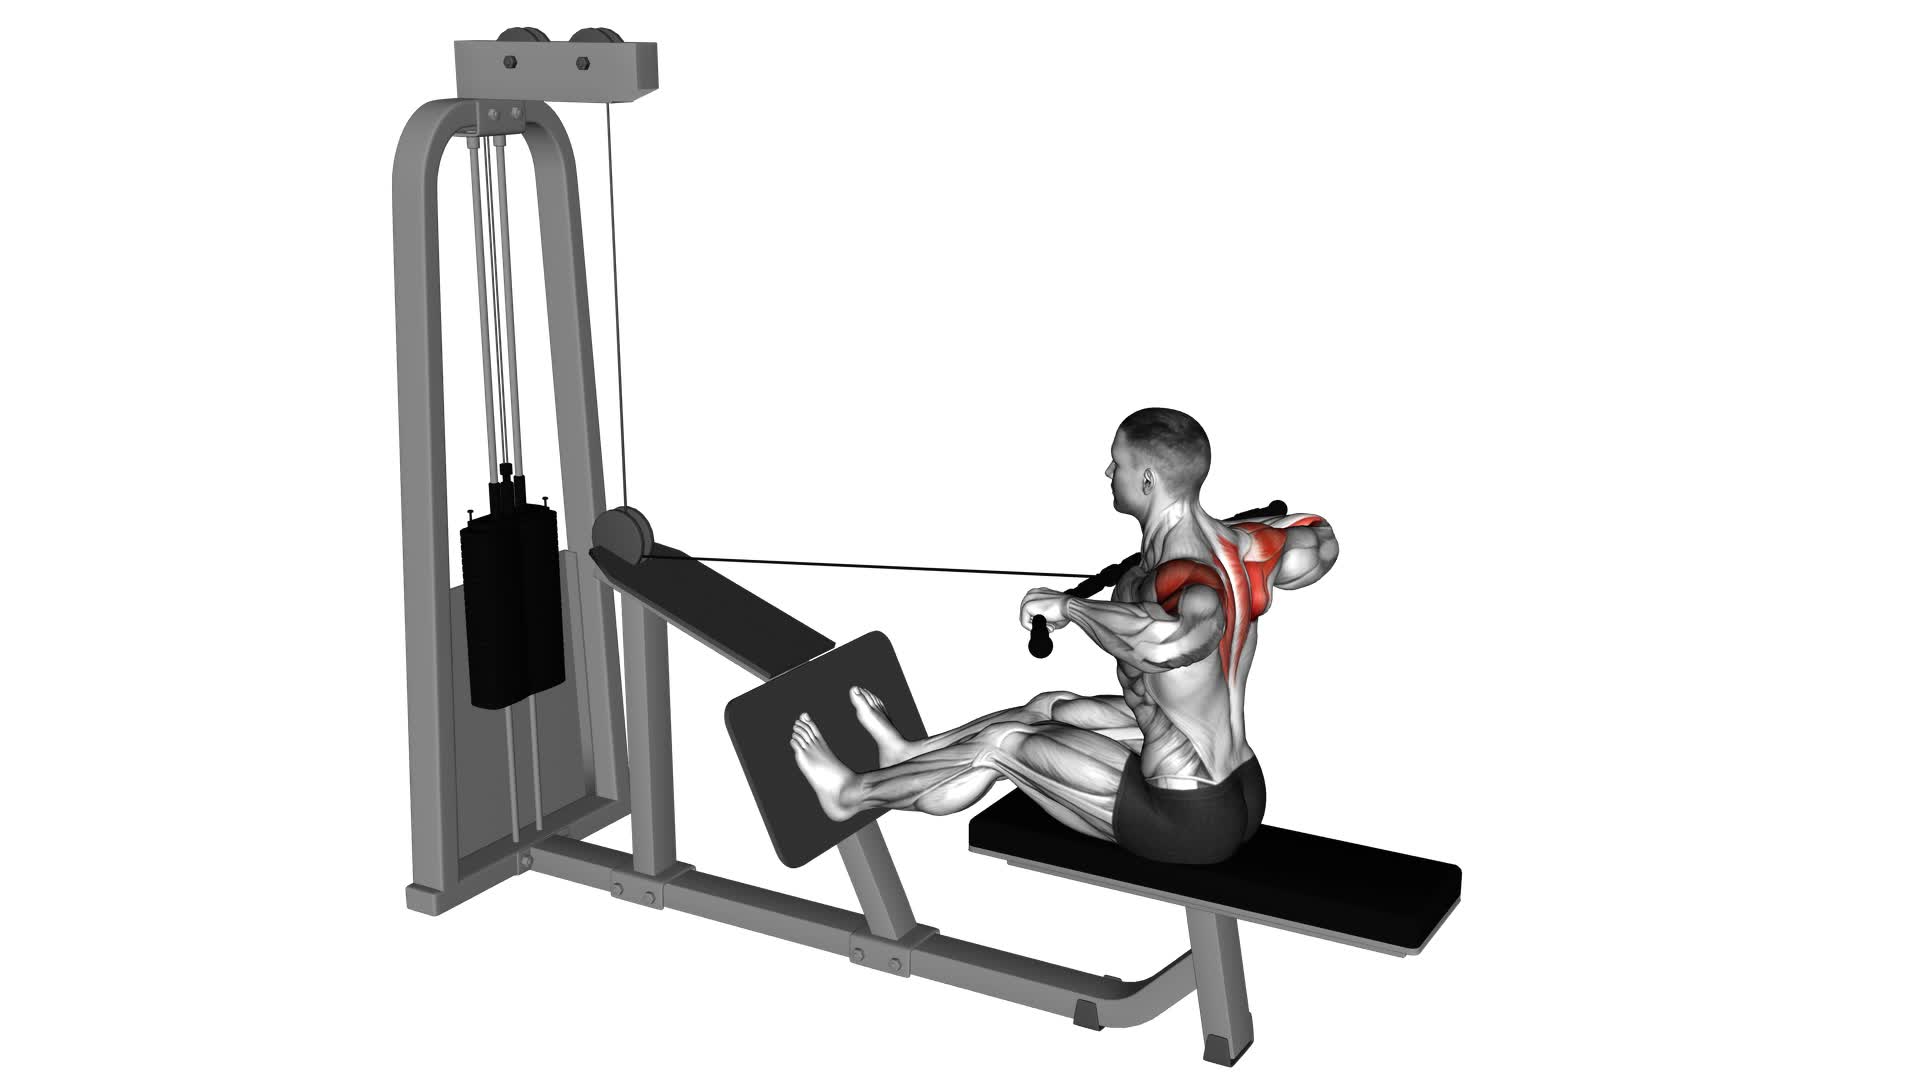 Cable Rear Delt Row - Video Exercise Guide & Tips